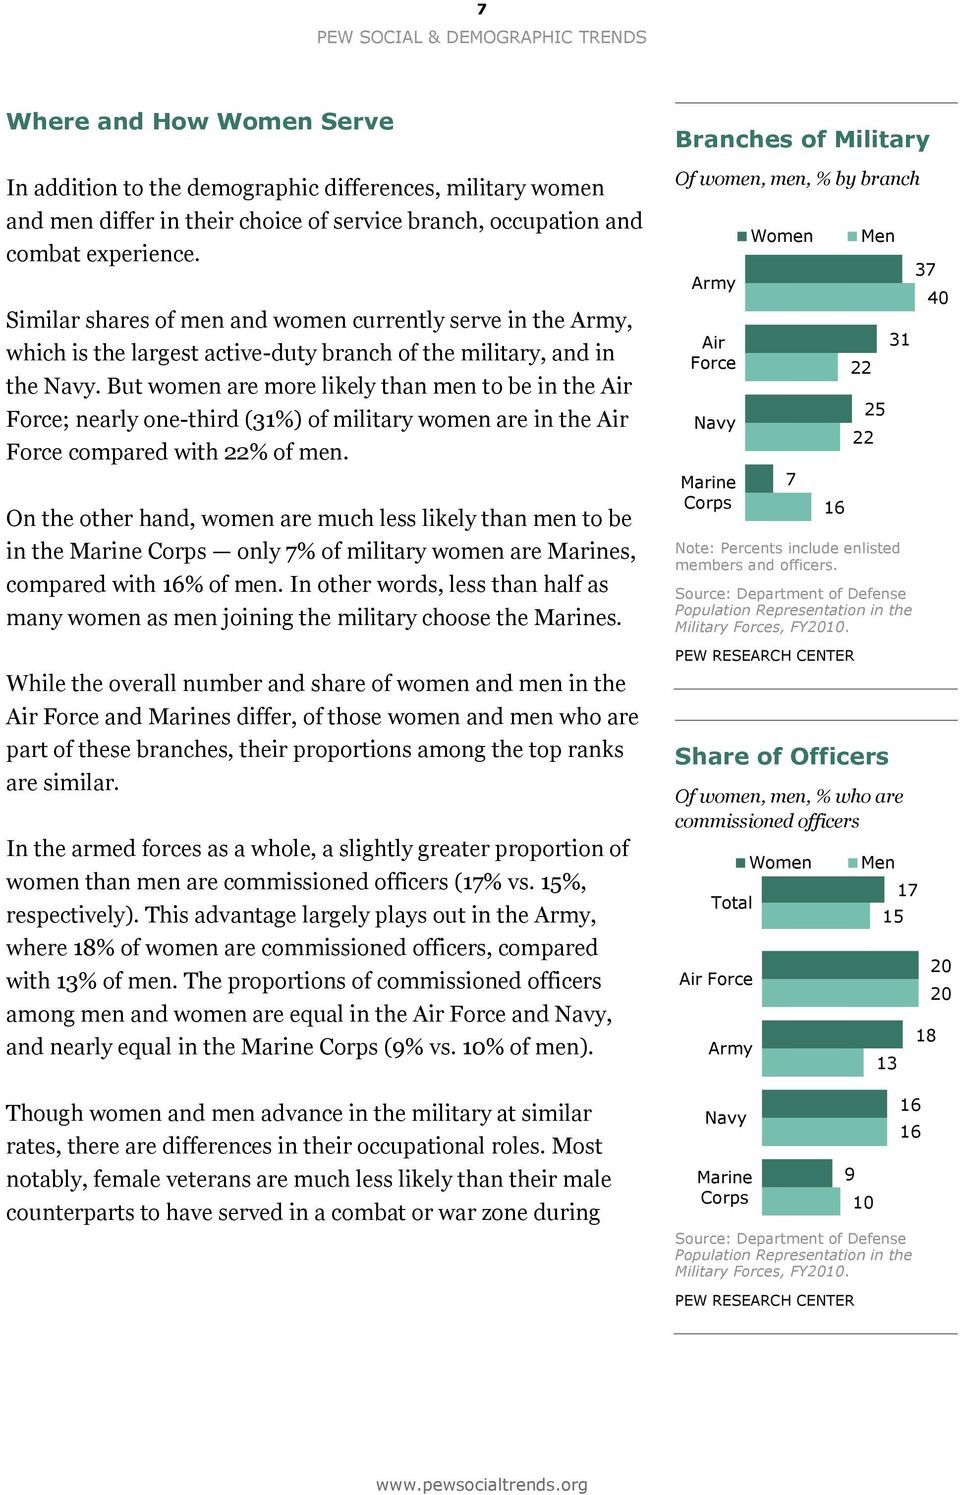 But women are more likely than men to be in the Air Force; nearly one-third (31%) of military women are in the Air Force compared with 22% of men.